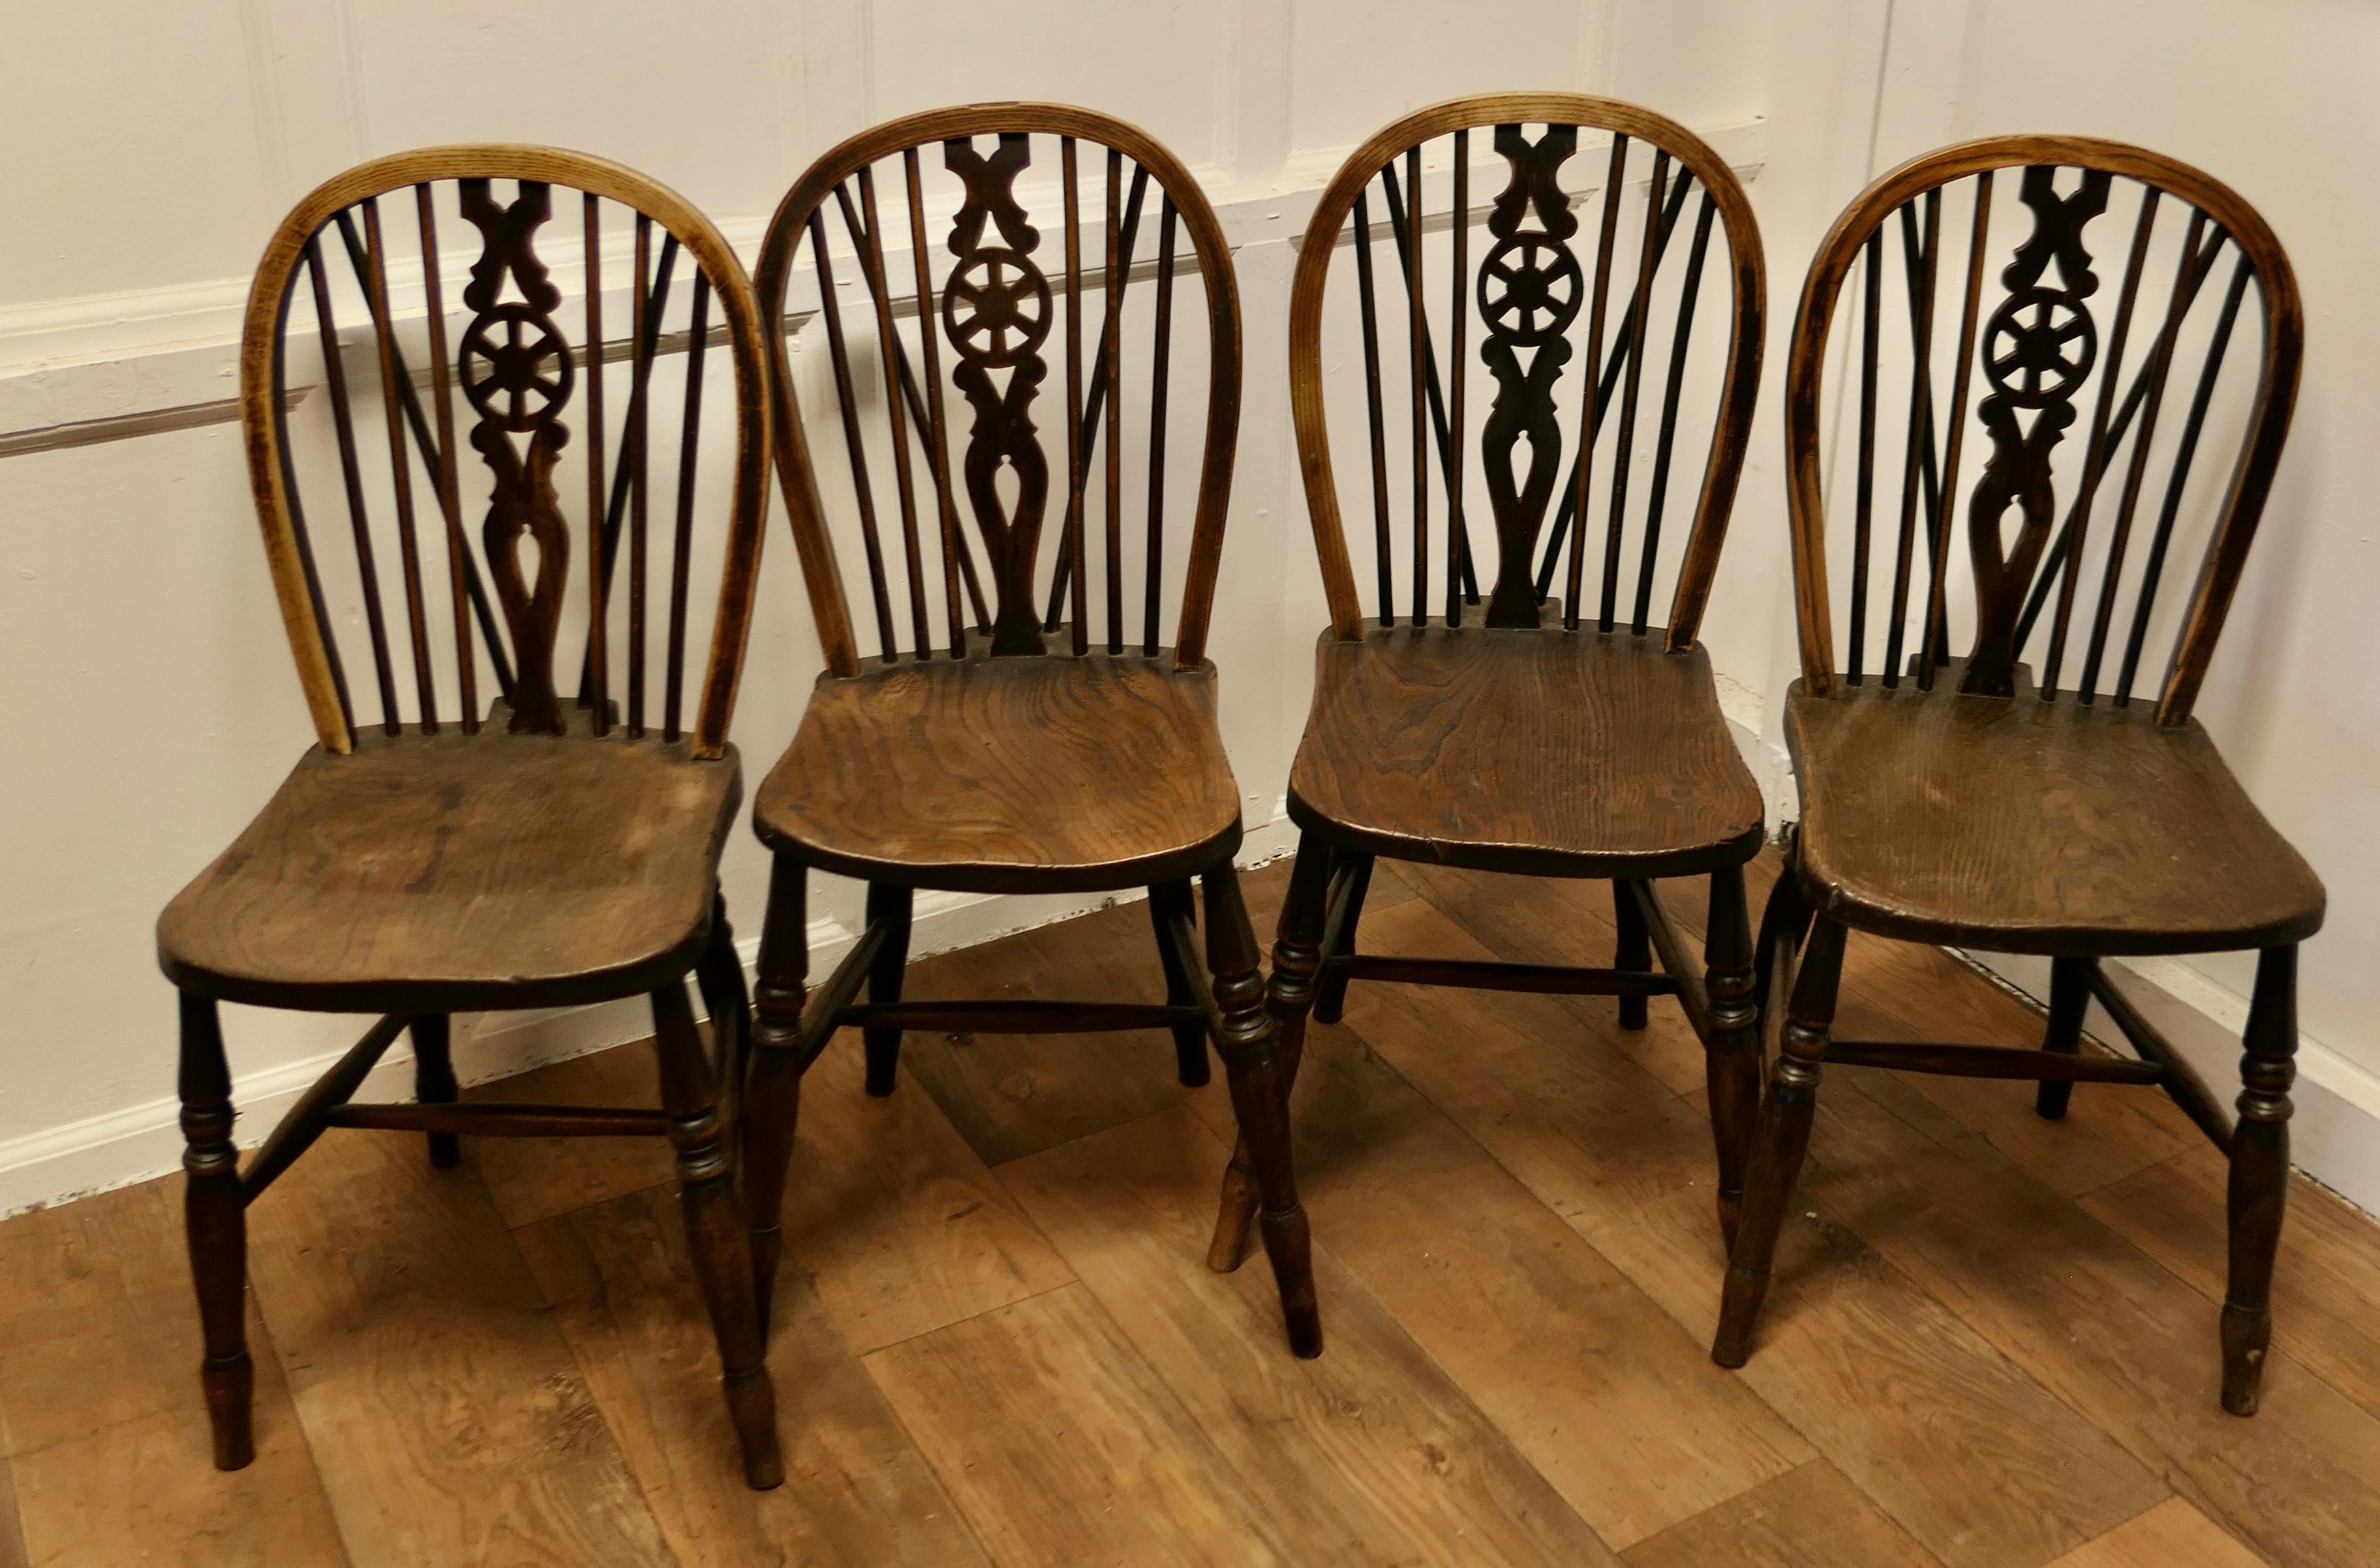 Late 19th Century A Lovely Old Set of 4 Ash & Elm Wheel Back Windsor Kitchen Chairs   